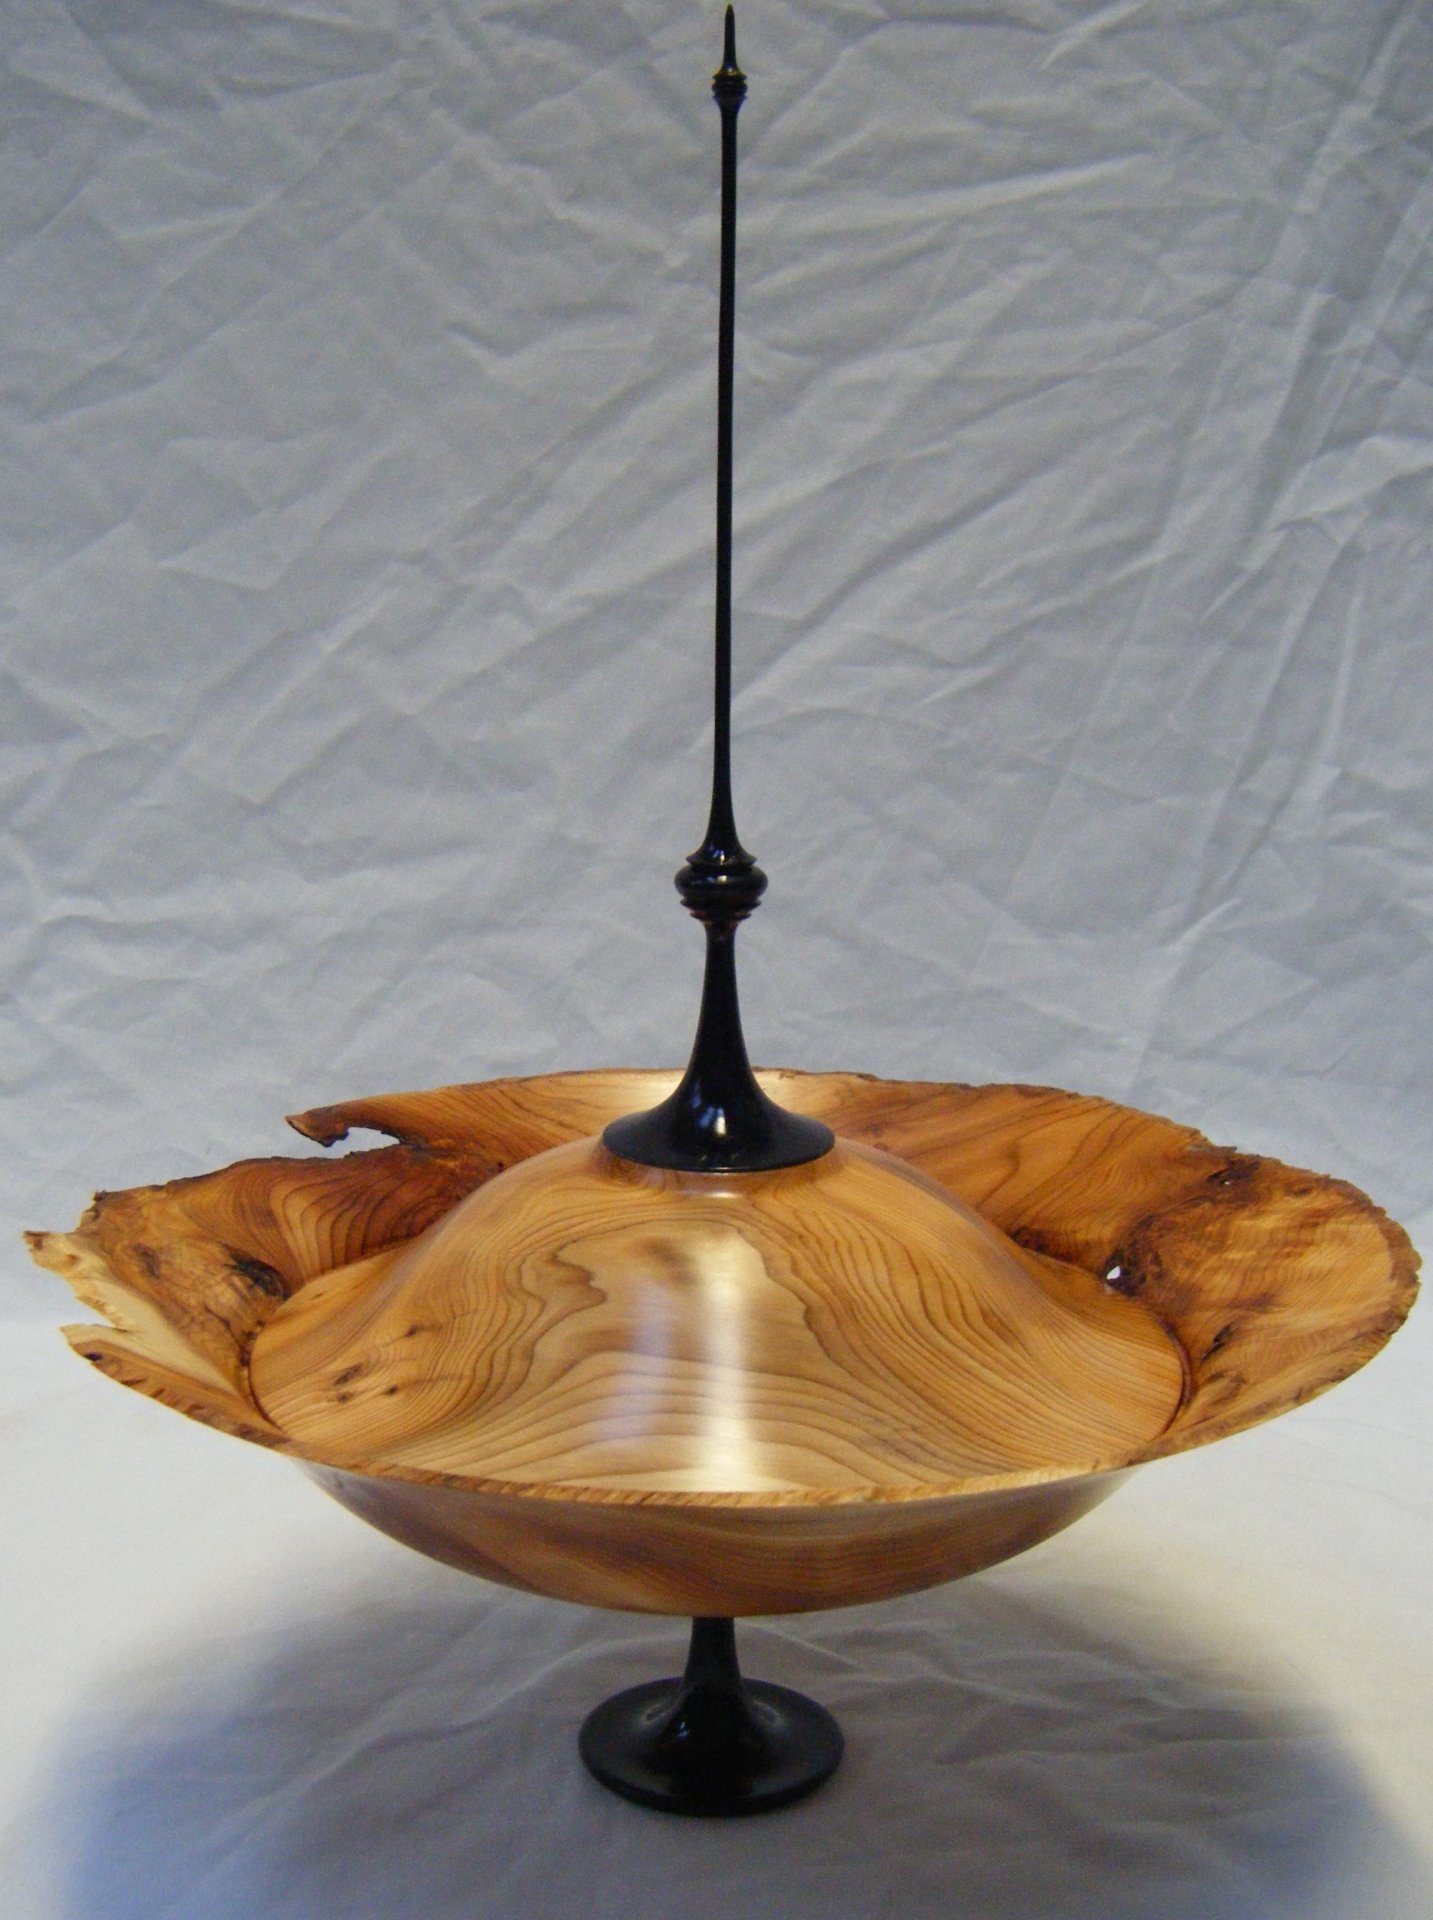 Yew Lidded Bowl On Pedestel With Tall Ebonisied Finial.